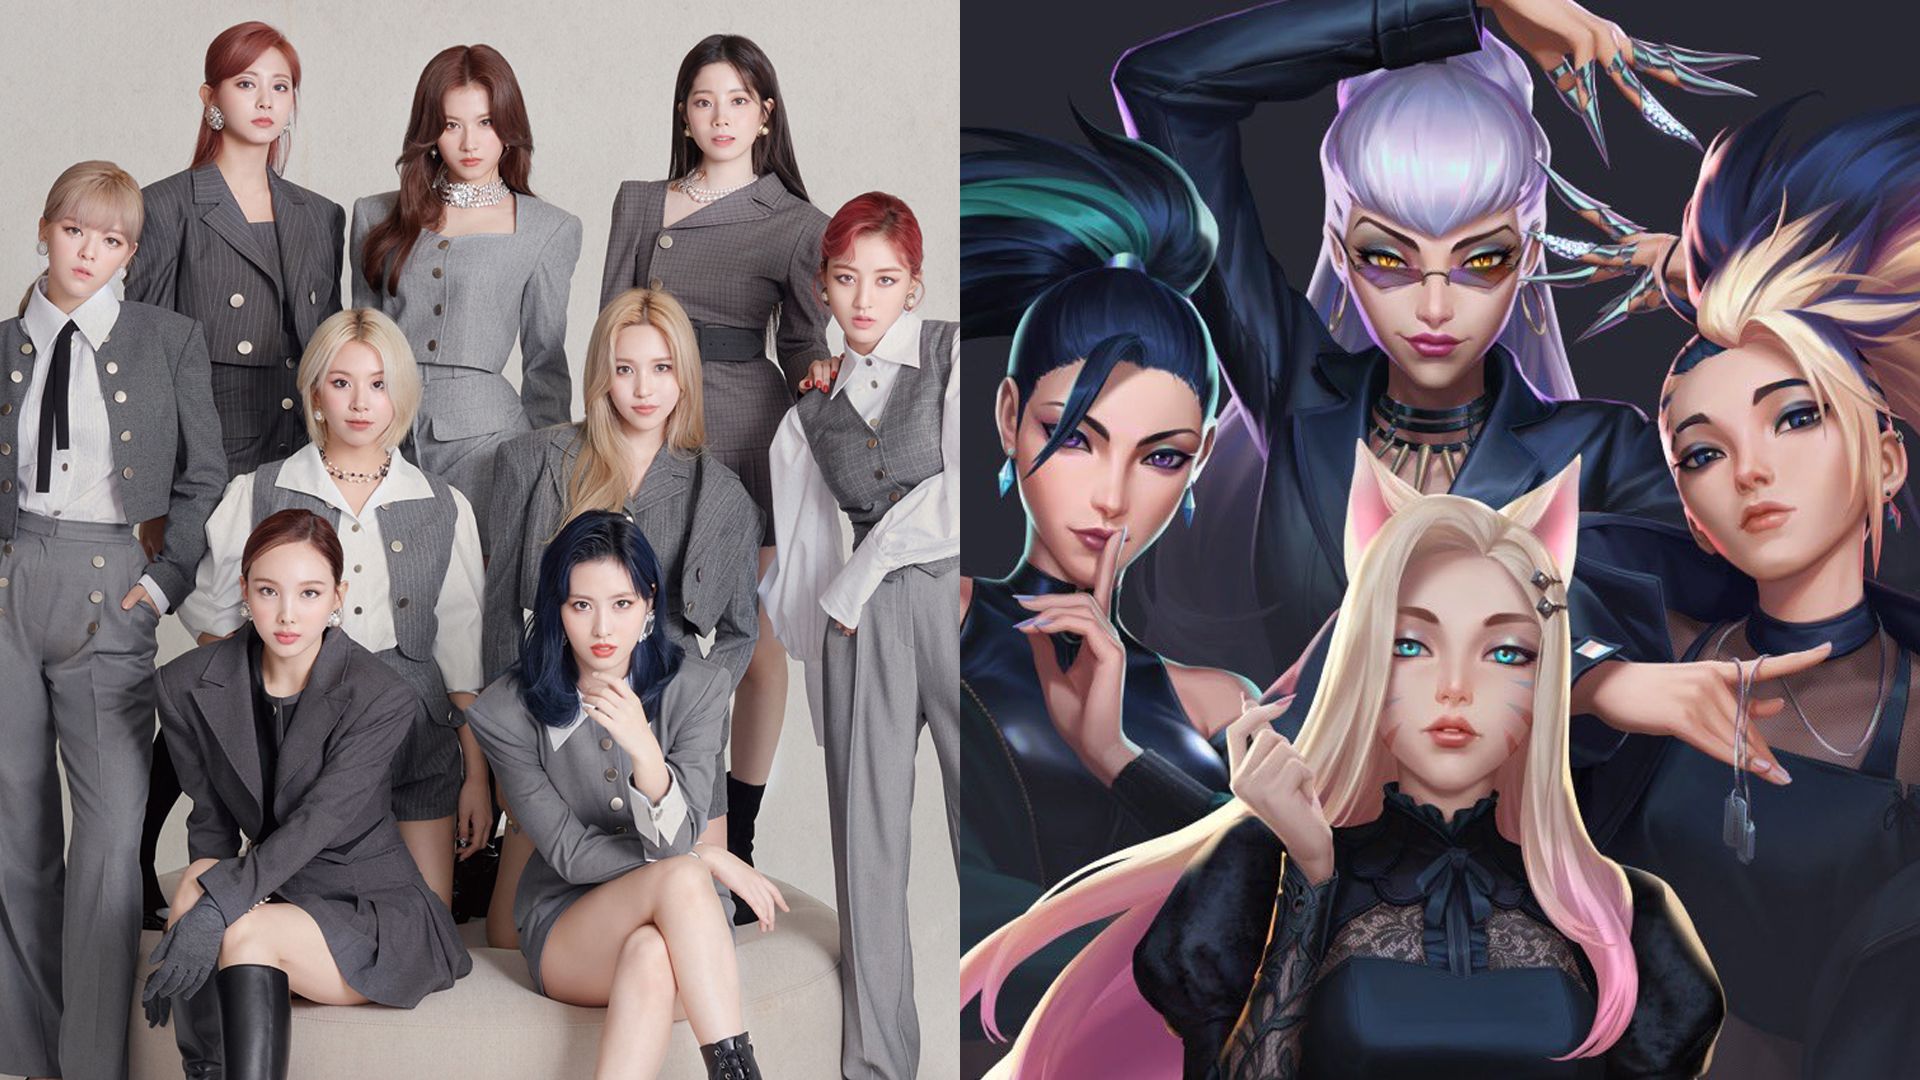 Twice and K/DA have a song collab in the upcoming 'All Out' EP